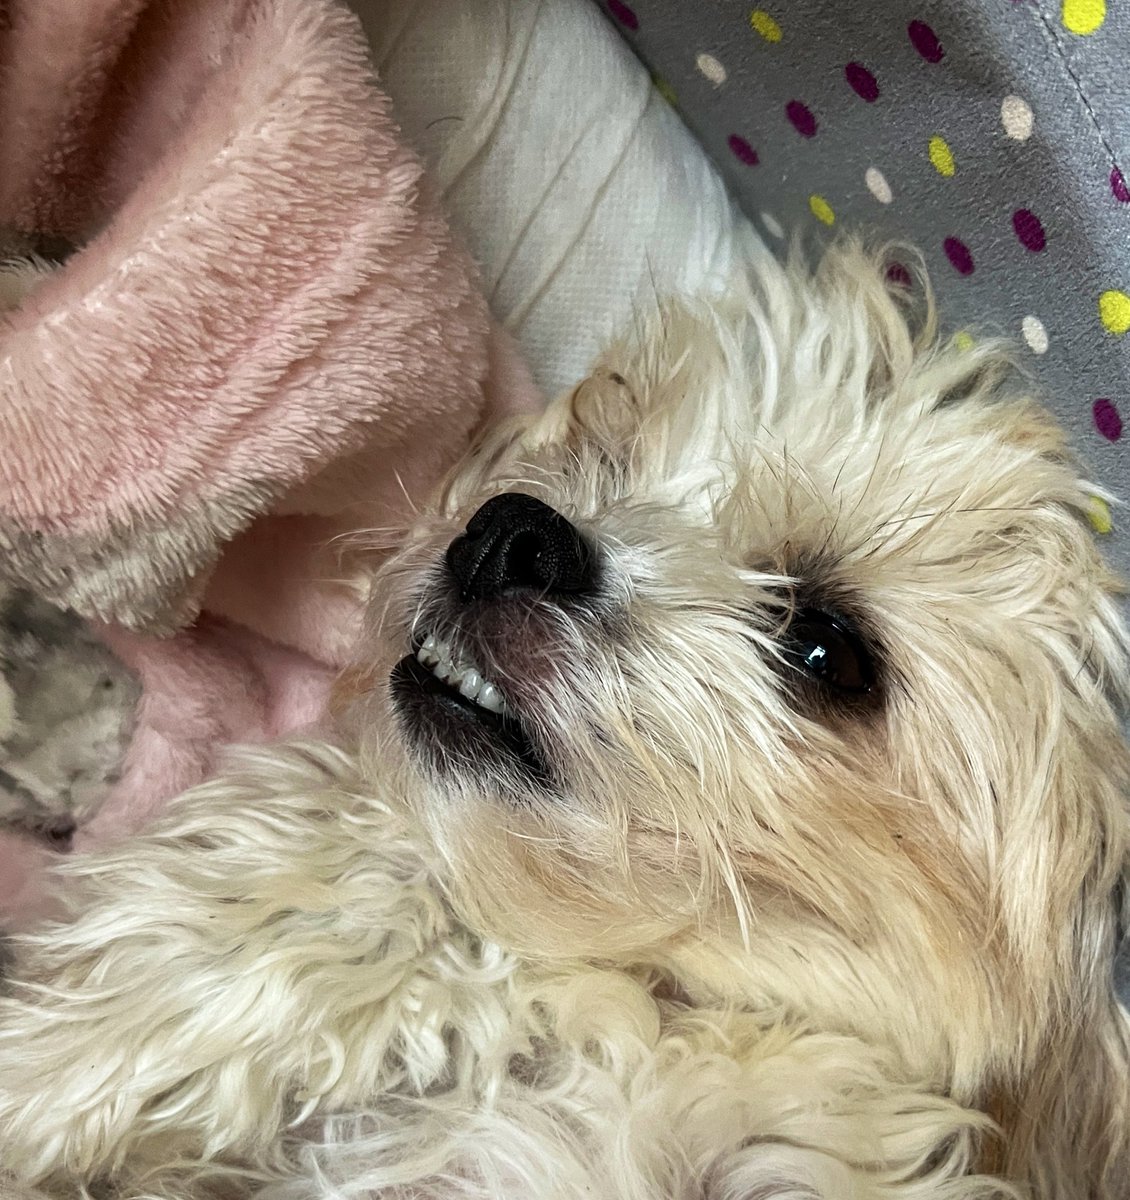 Happy paw pals? What you pawsome lot up to? Have a woofin good day #MondayMorning #MondayMotivation #dogsofx #doglife #dogs #zshq #chilling #iampuh 🐶🐾💕